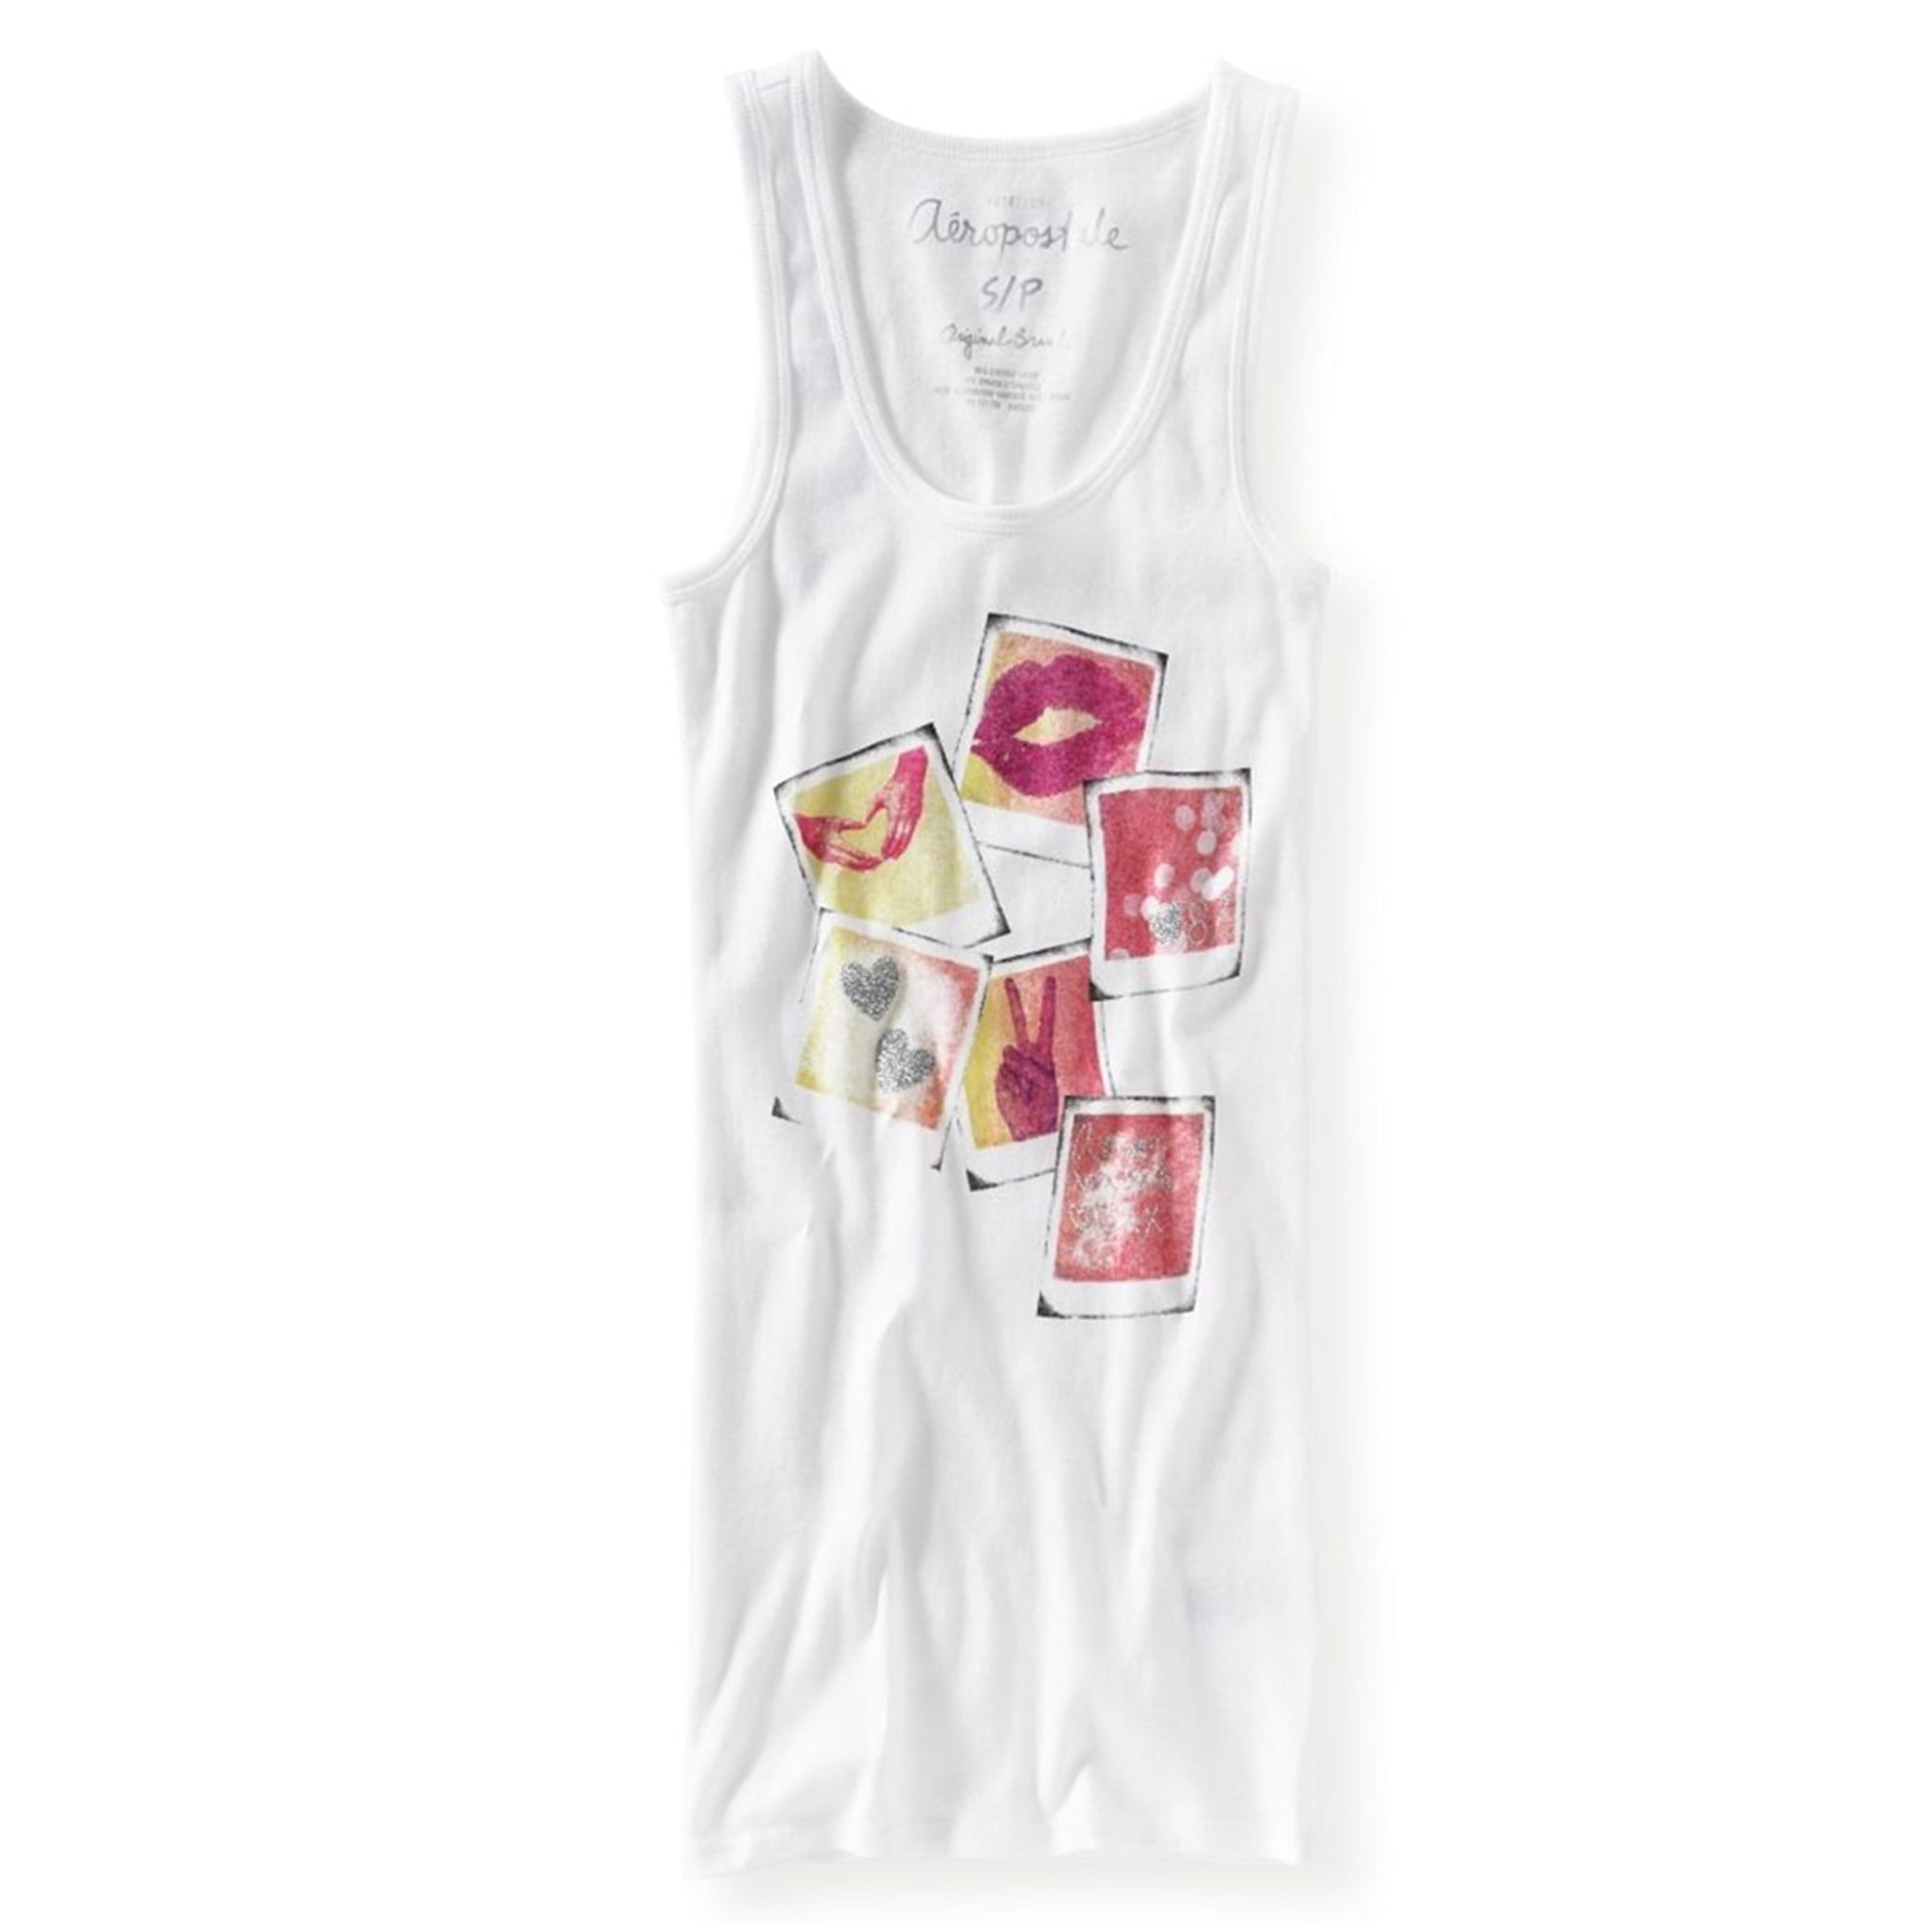 AEROPOSTALE Womens Racer Back Pictures Tank Top